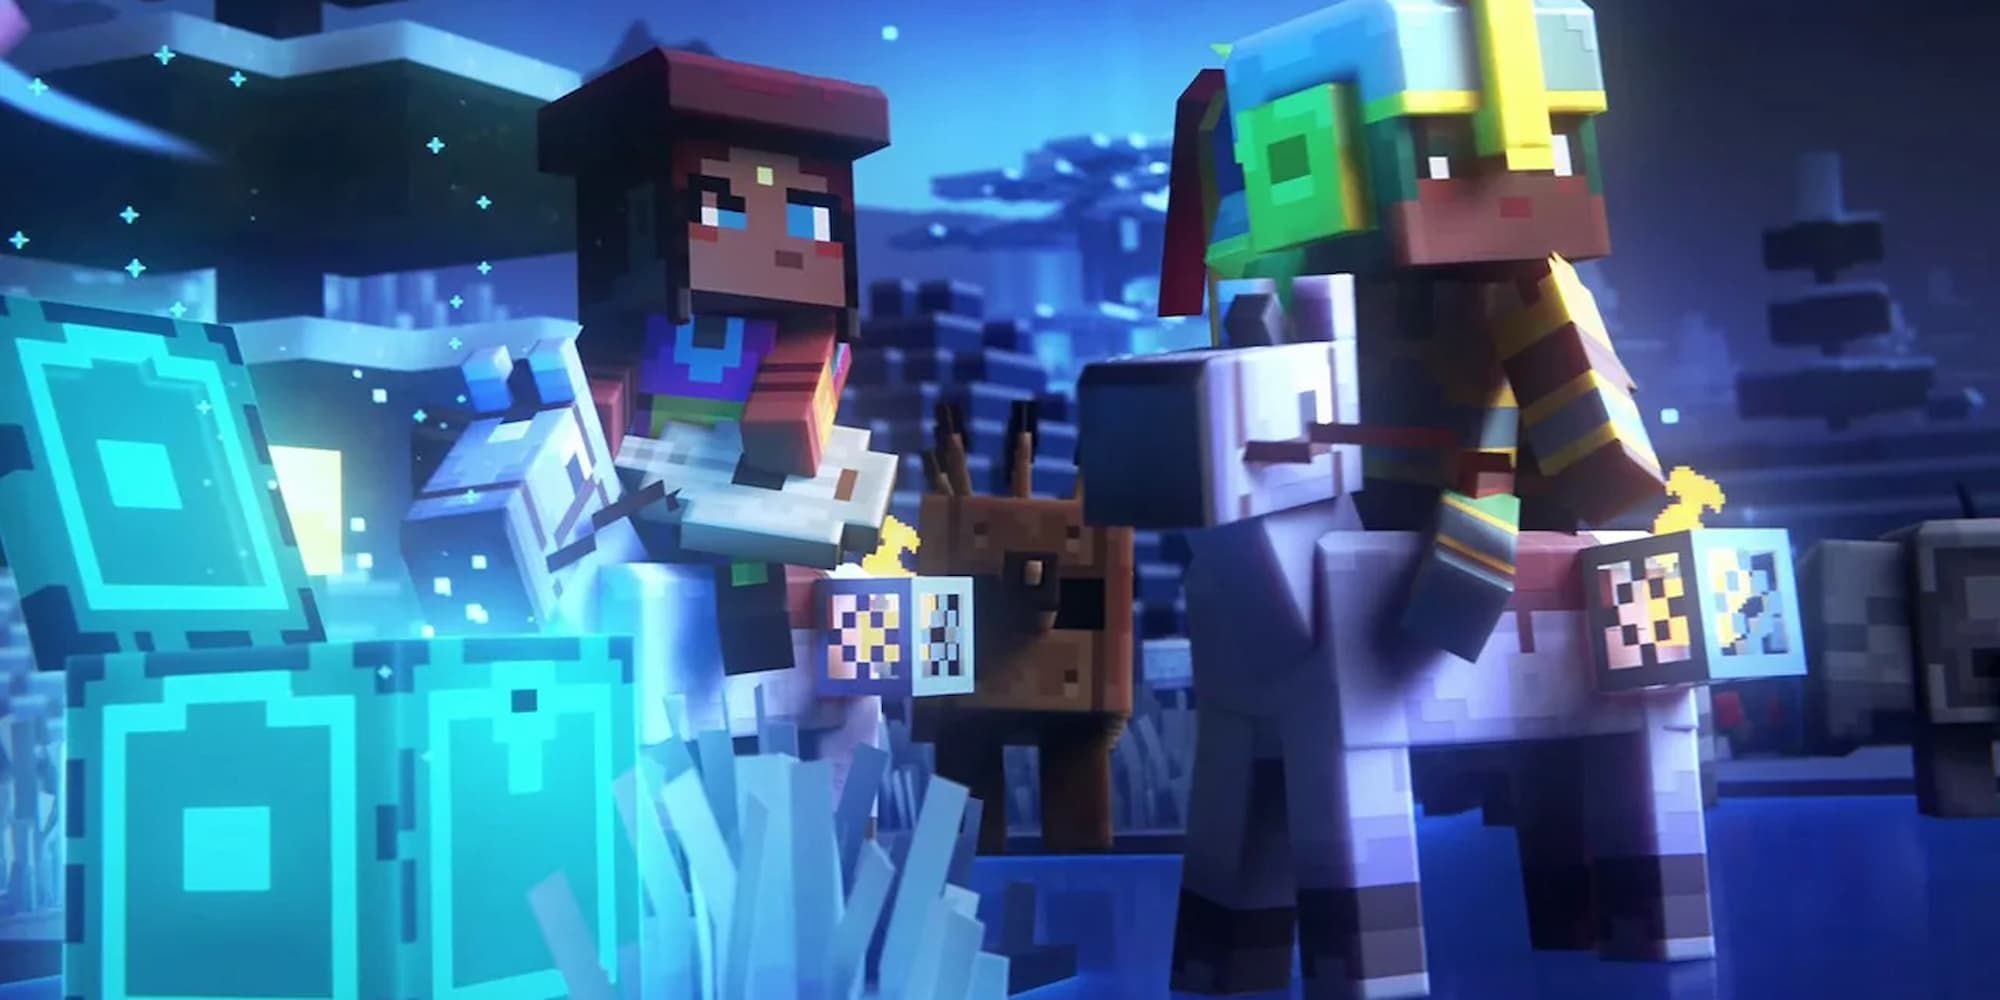 Minecraft's last call to migrate: How not to lose your account